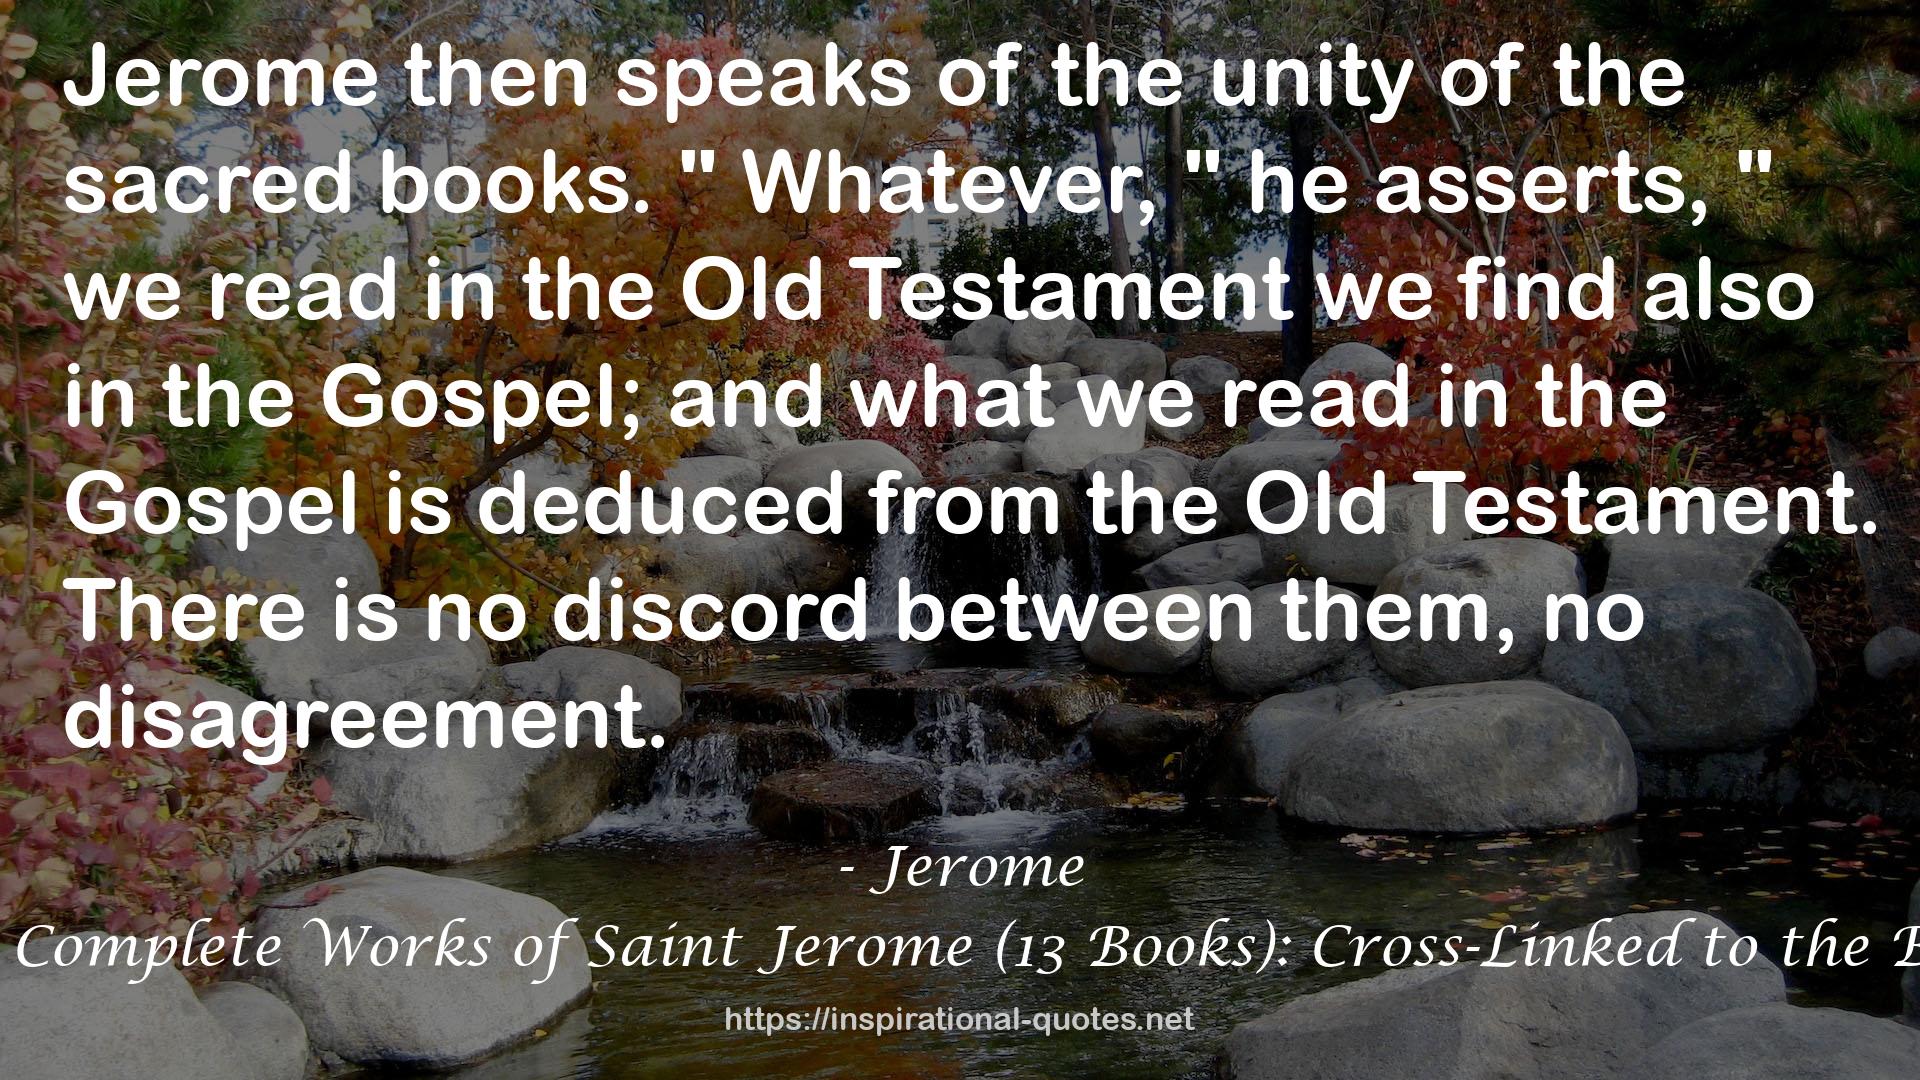 The Complete Works of Saint Jerome (13 Books): Cross-Linked to the Bible QUOTES